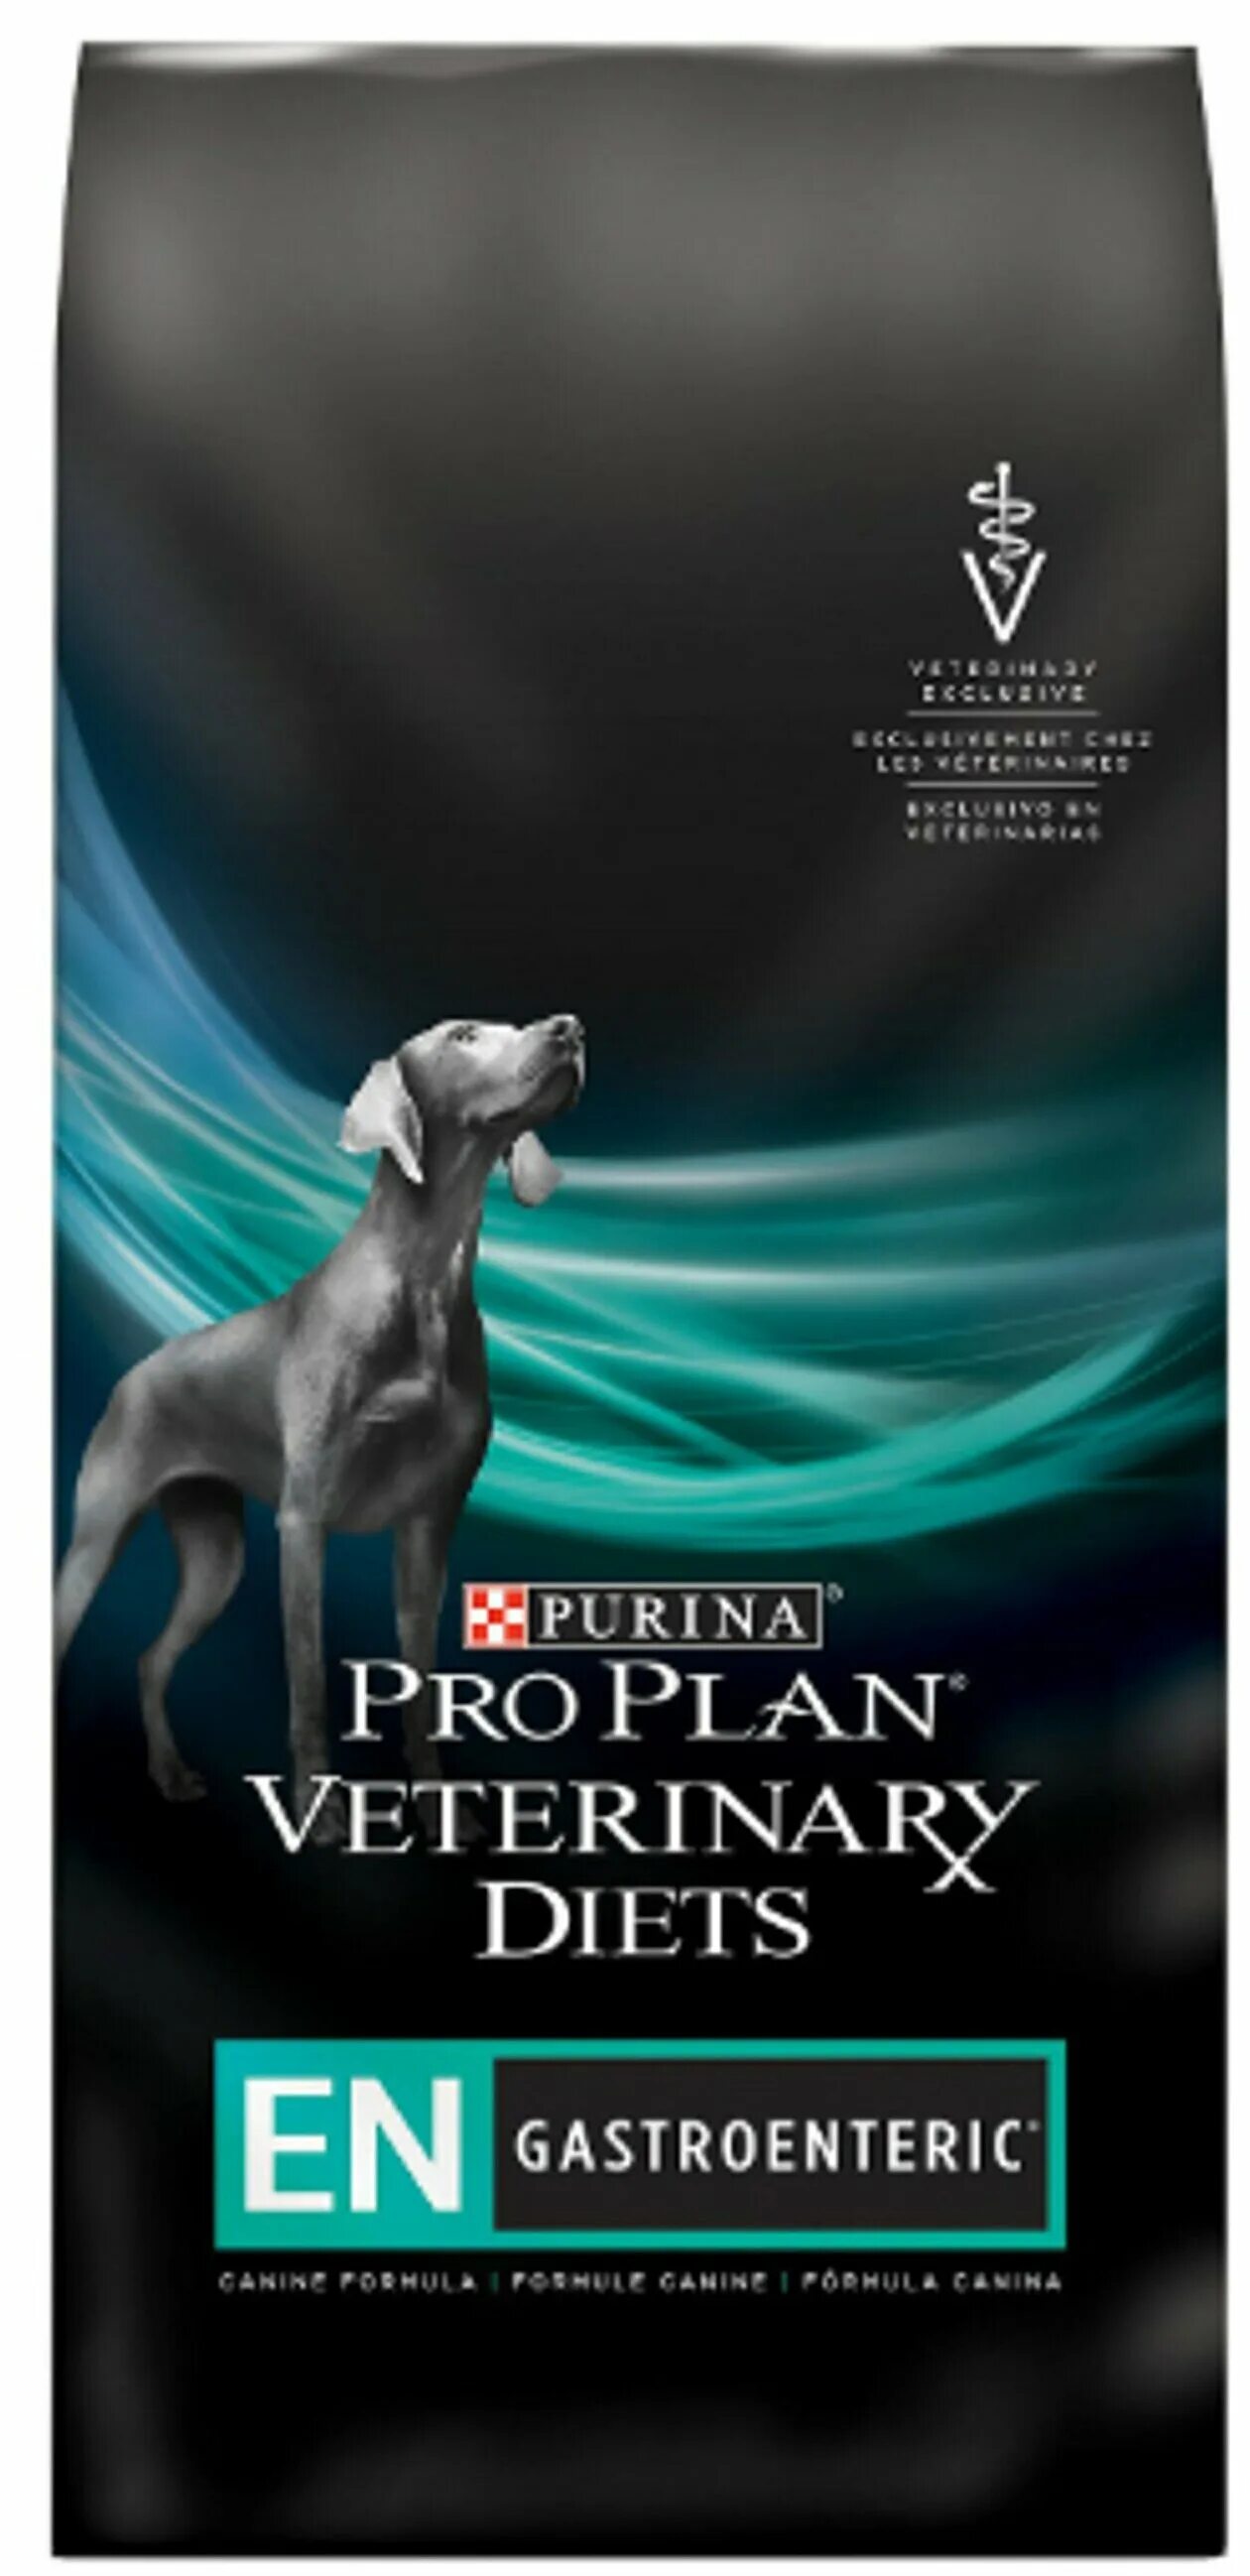 Purina Pro Plan ha Hypoallergenic. Purina Pro Plan Veterinary Diets Urinary собаки сухой. PROPLAN Veterinary Diets для собак. Корм для собак Pro Plan Veterinary Diets Joint Mobility 3 кг.